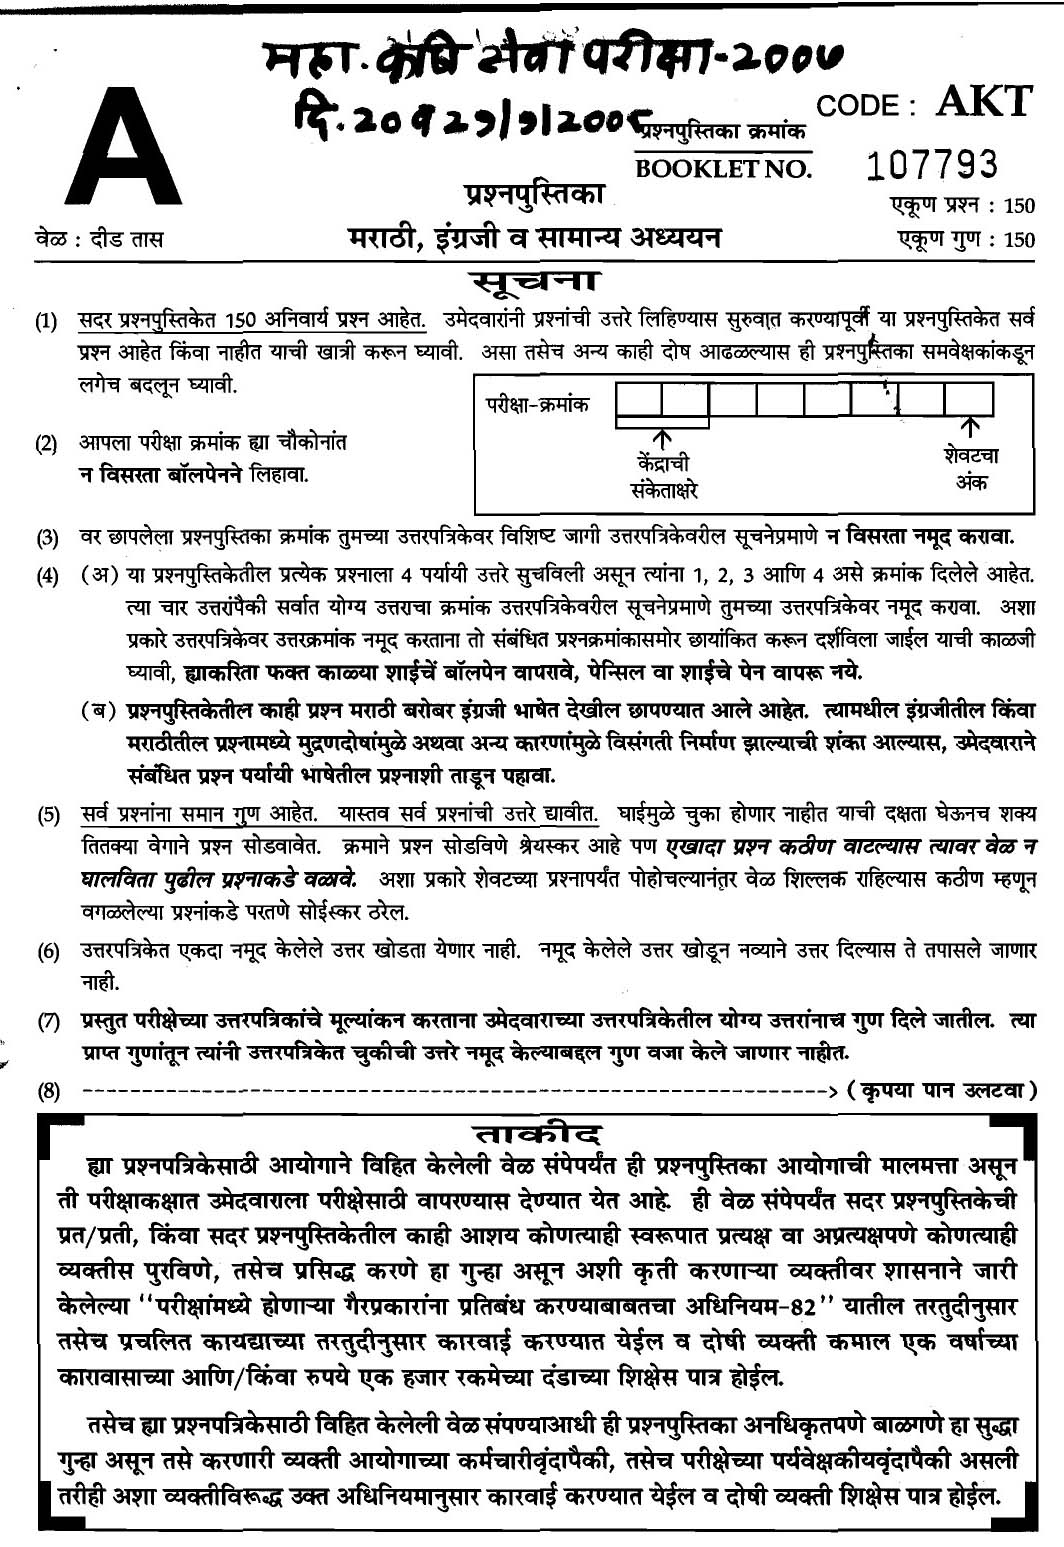 MPSC Agricultural Services Exam 2007 General Question Paper 1